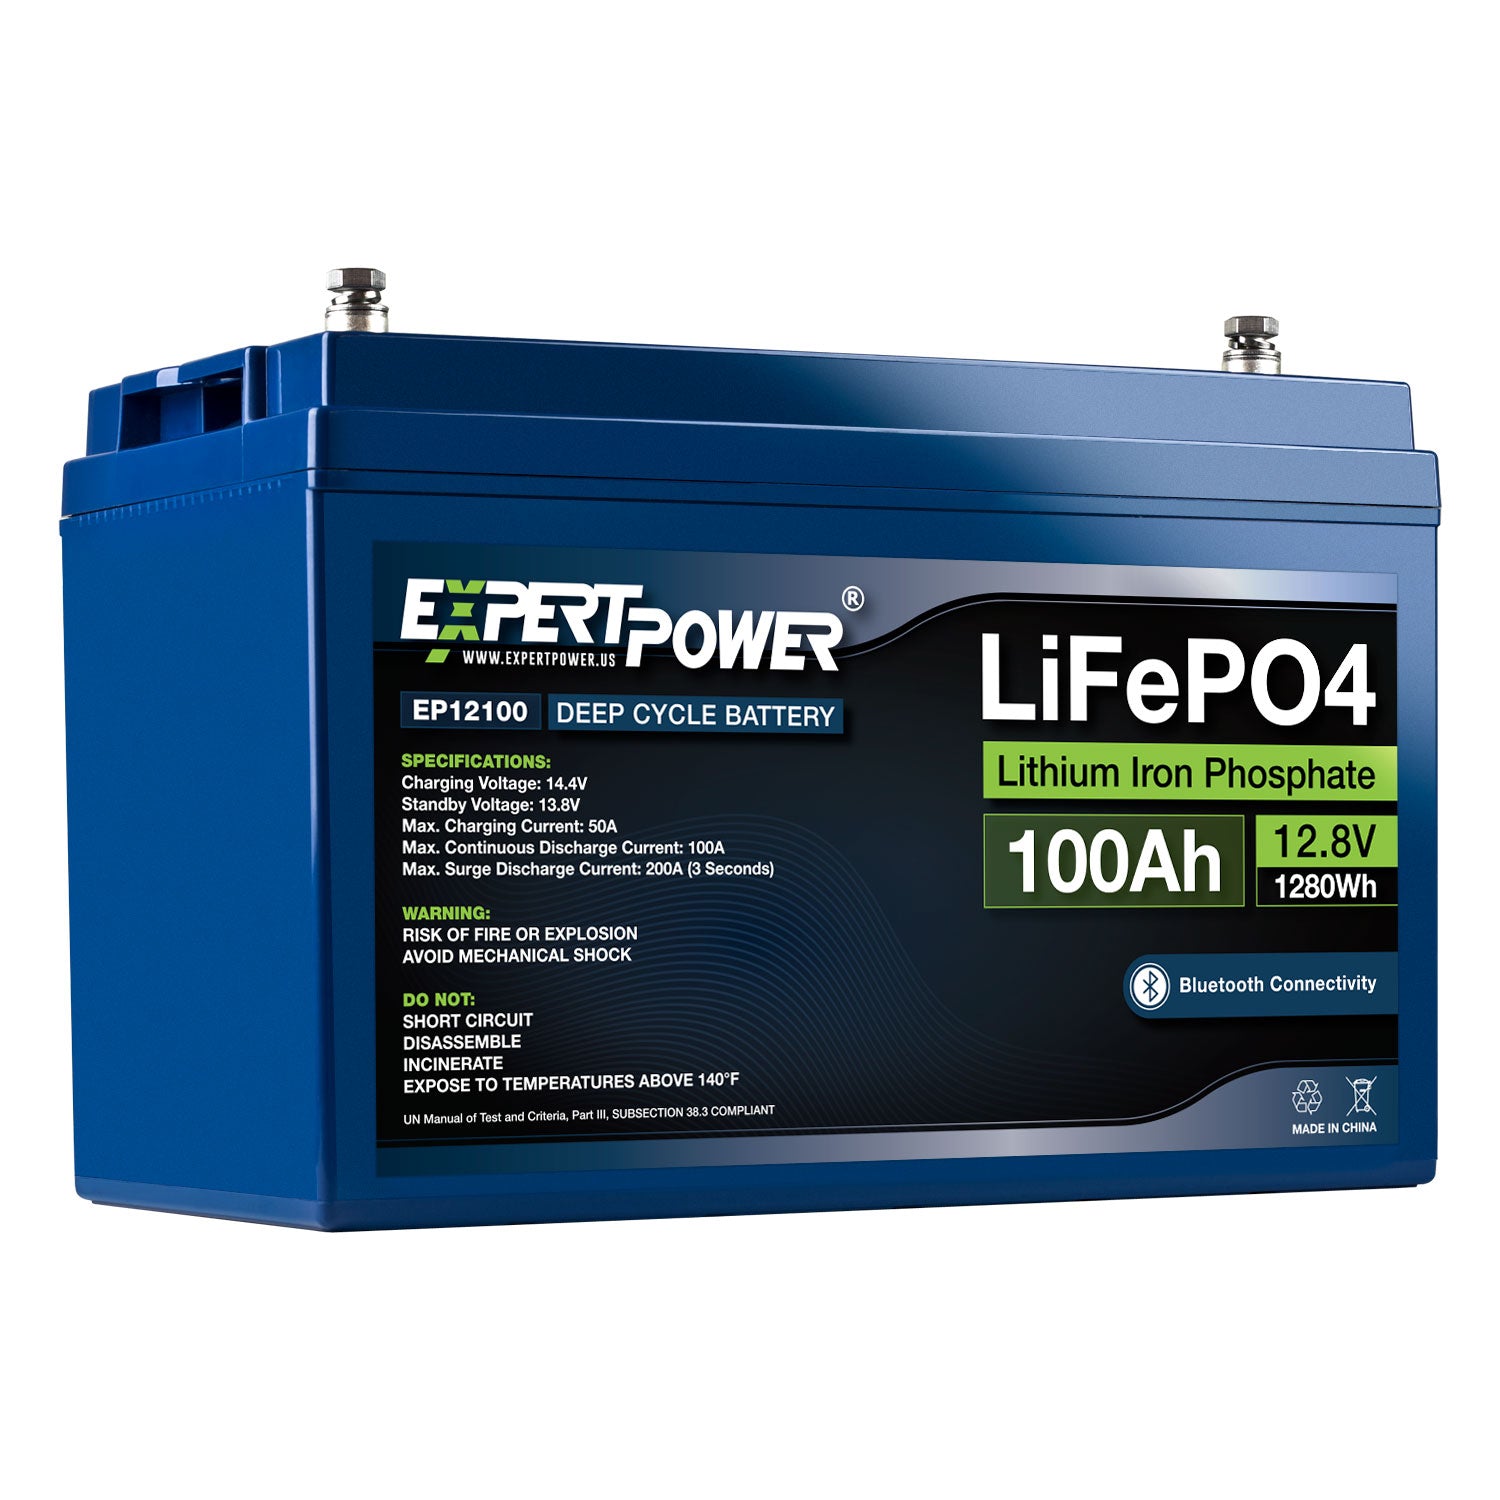 BtrPower 2 Pack 12V 100Ah LiFePO4 Deep Cycle Lithium Rechargeable Batt